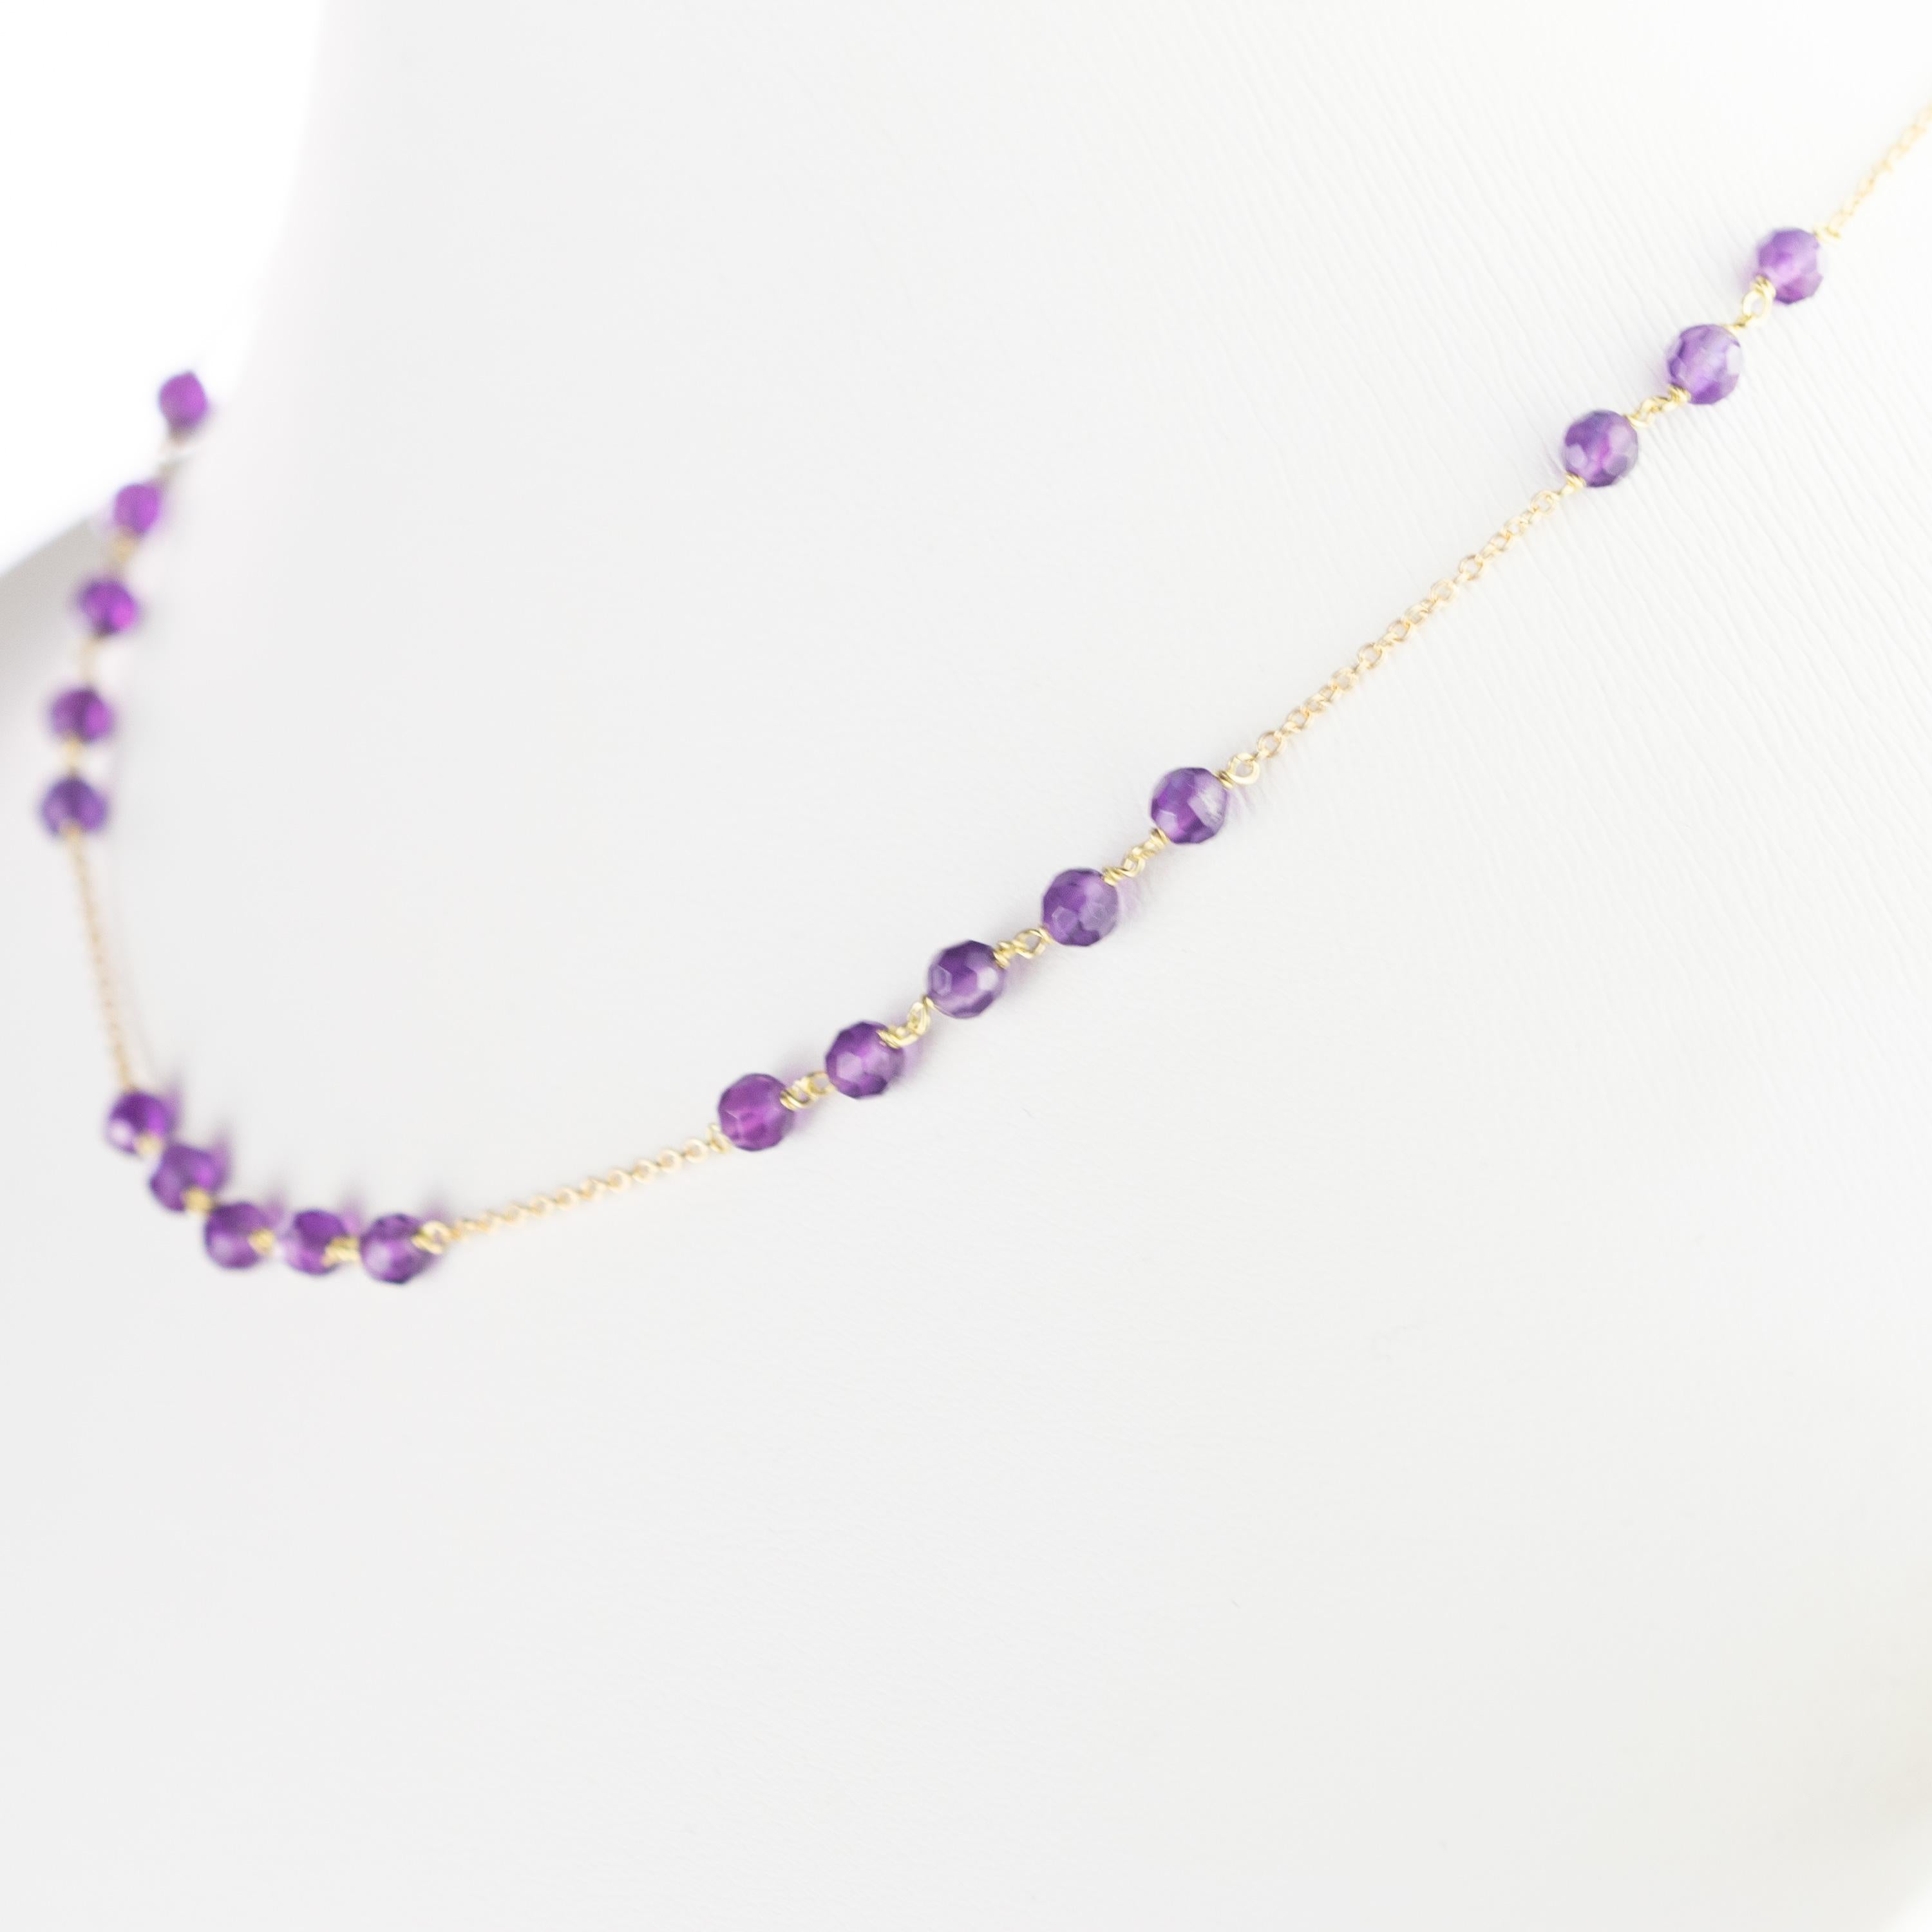 Amethyst Rondelles Gold Plate Chain Handmade Cocktail Chic Modern Necklace For Sale 2